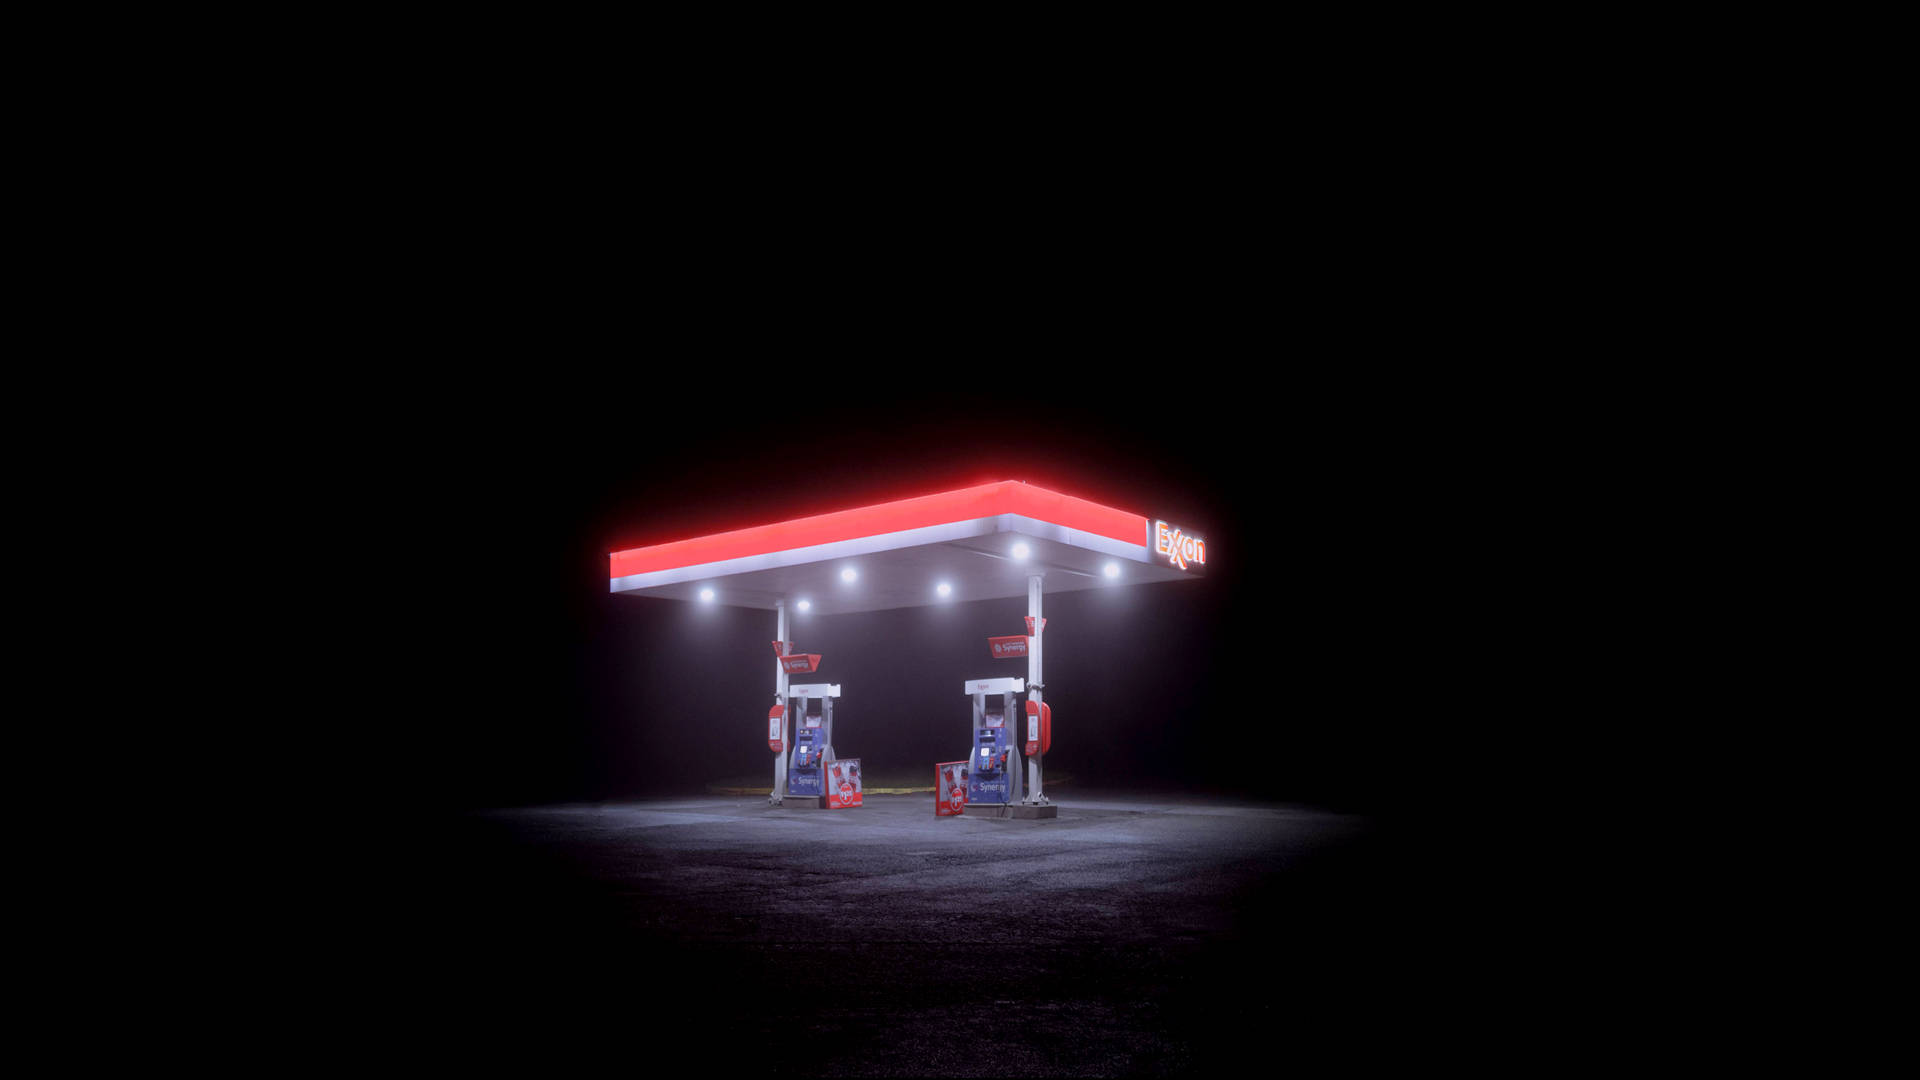 Solo Gas Station In Dark Place Wallpaper